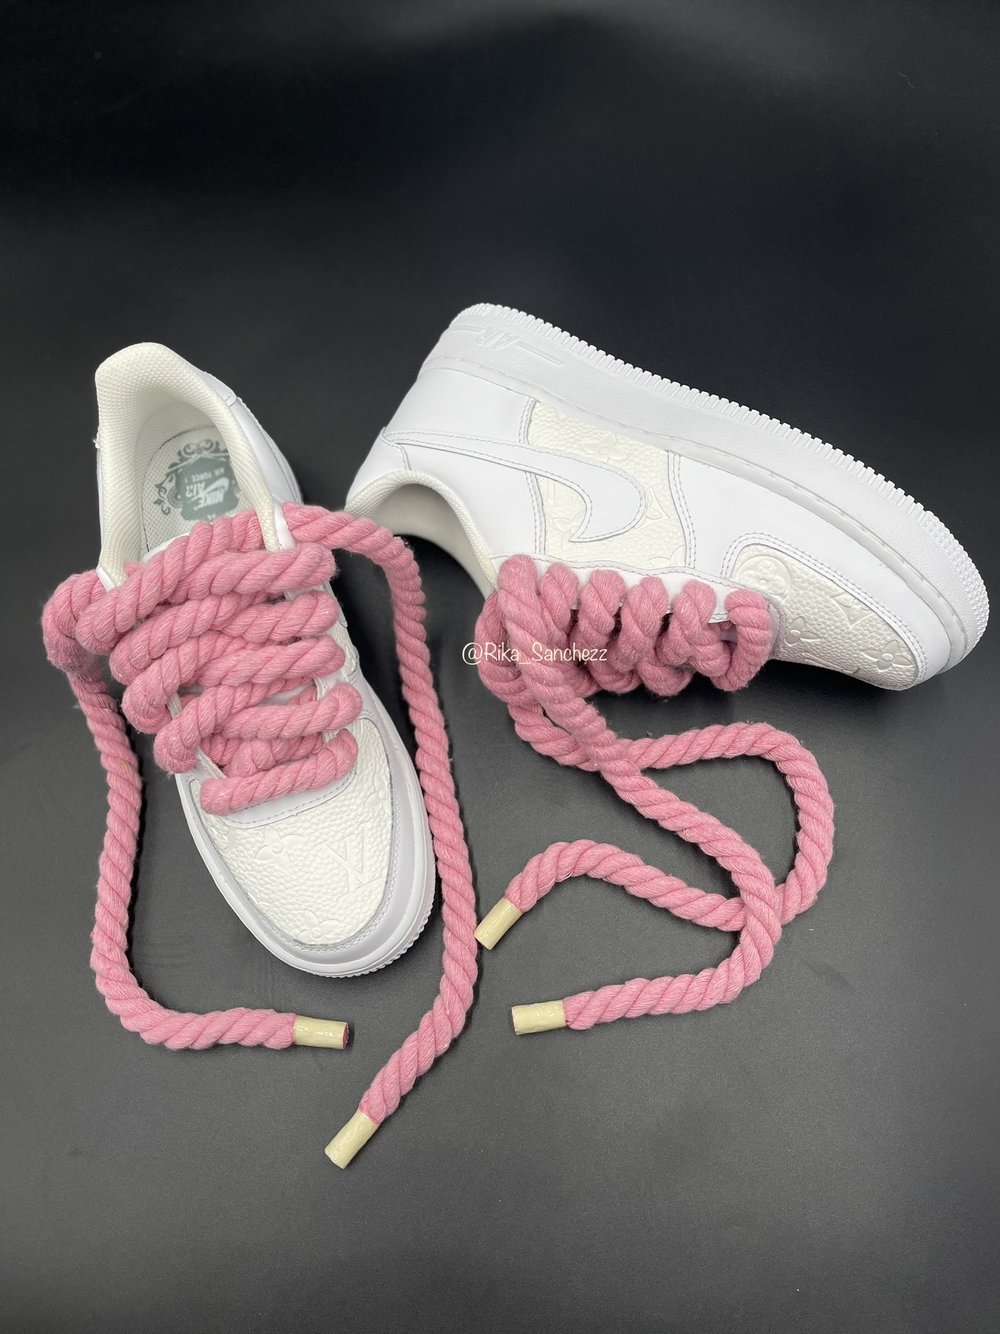 Rope Lace w/ Bling Swoosh Air Force 1 — Rika Sanchezz Customs